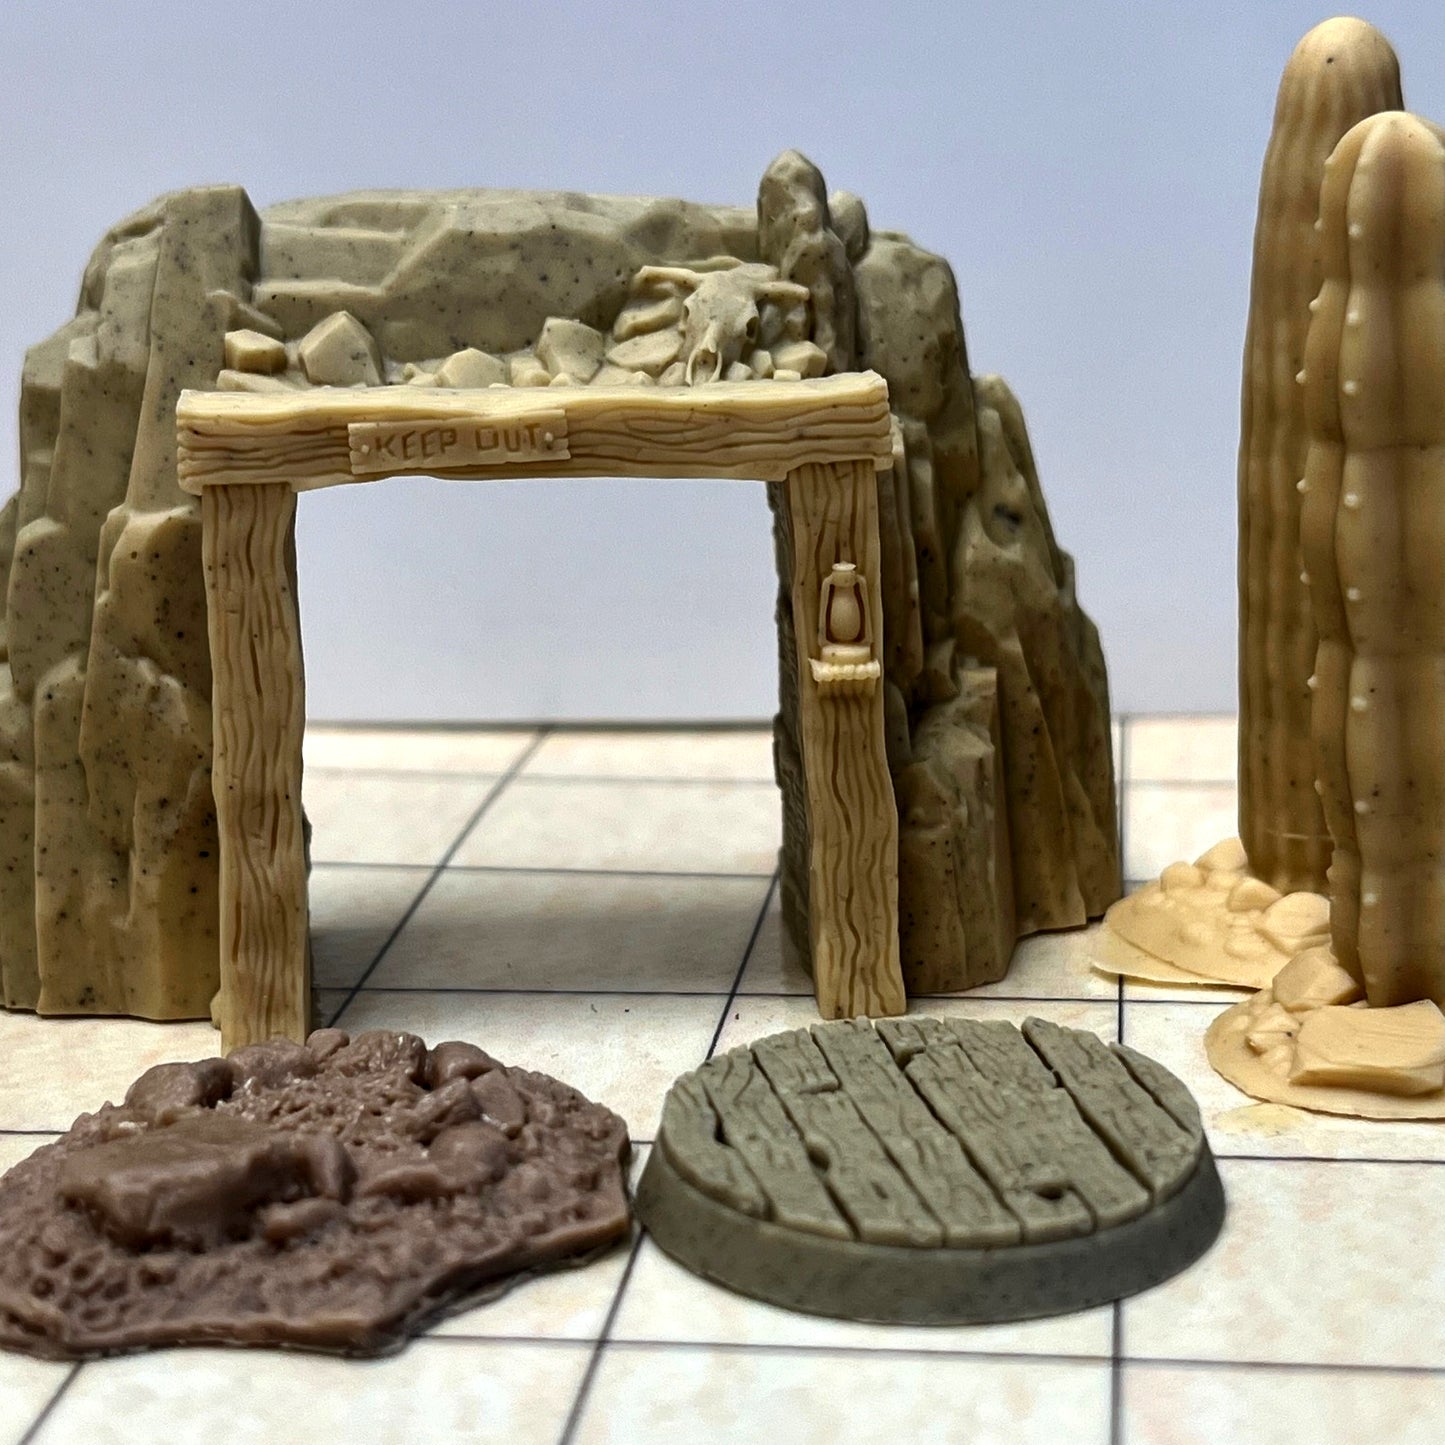 Gold mine scatter terrain for TTRPG, DND role playing games